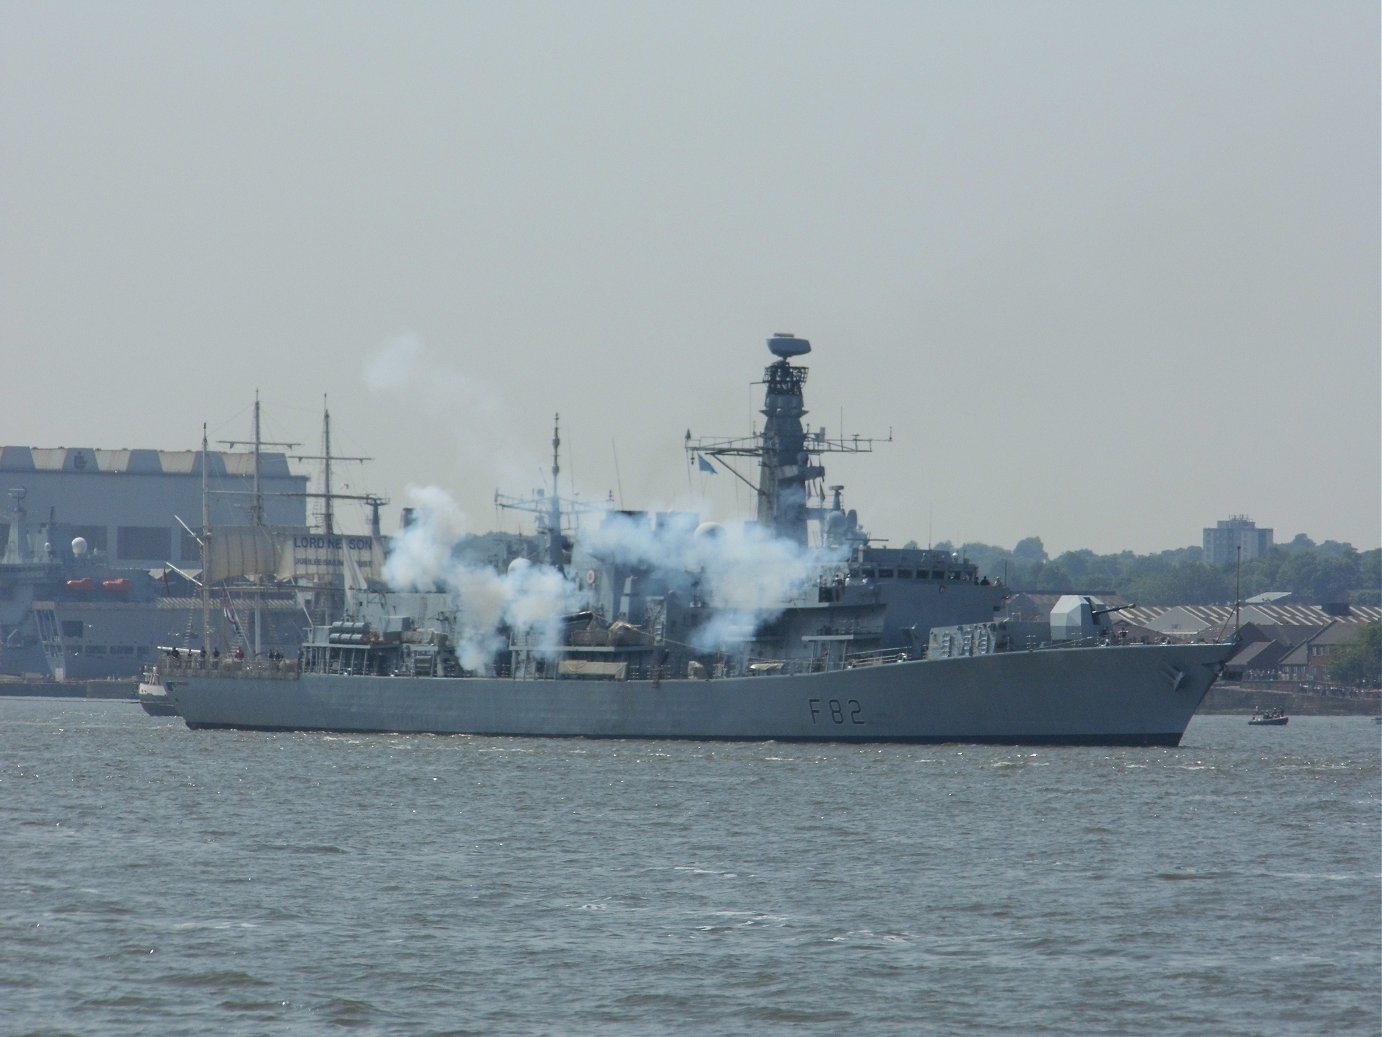 Type 23 frigate H.M.S. Somerset at Liverpool, May 28th 2018